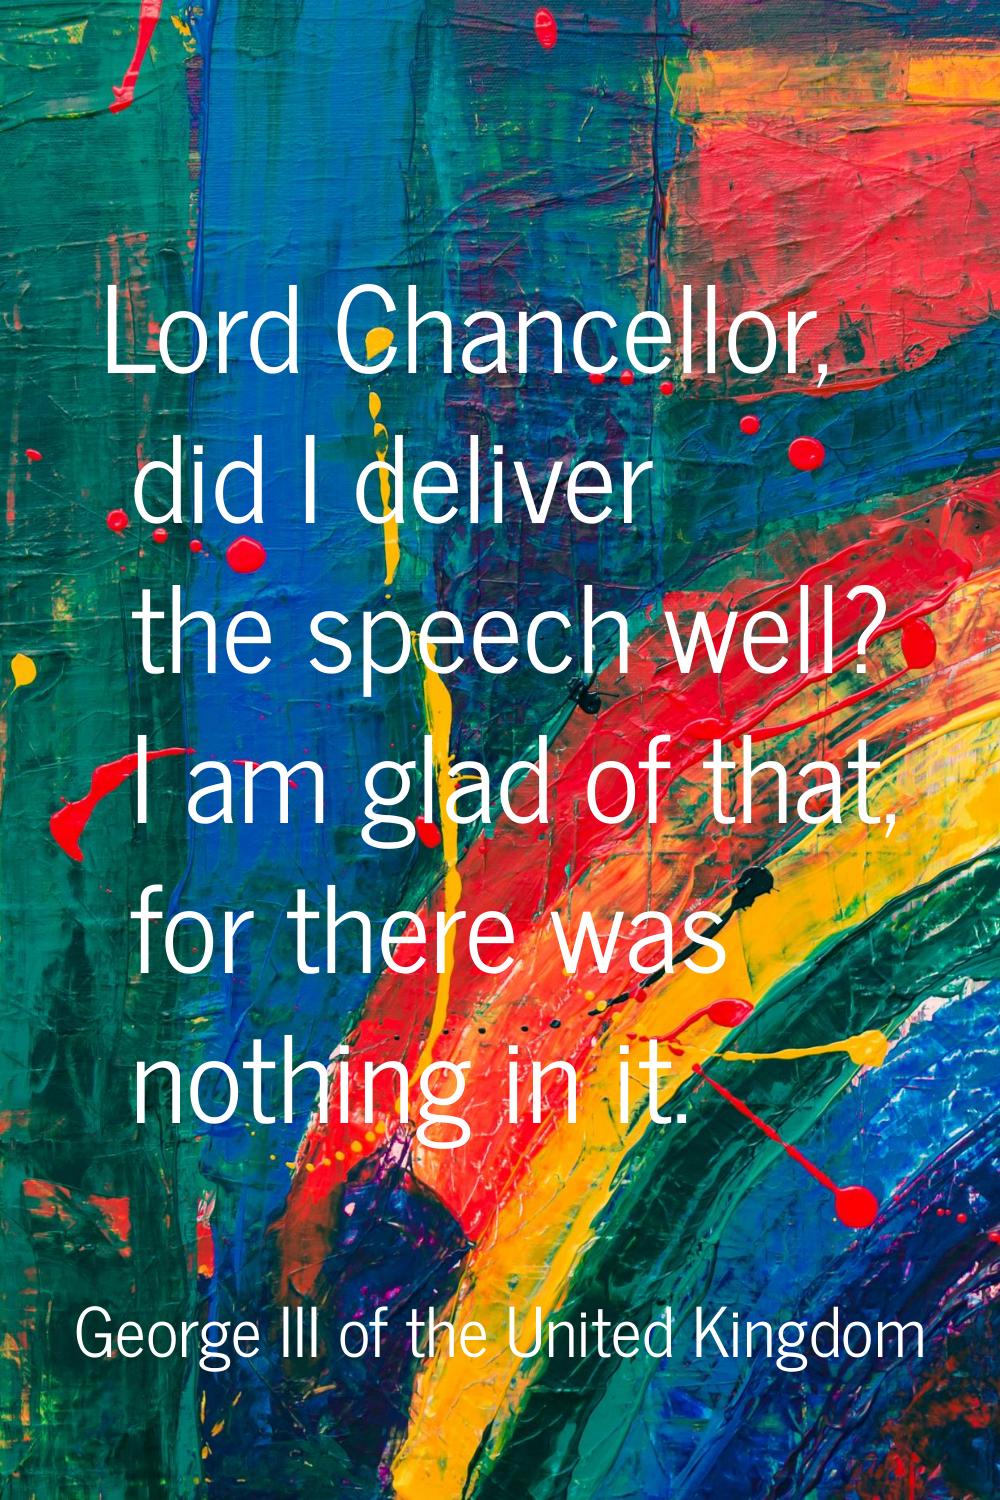 Lord Chancellor, did I deliver the speech well? I am glad of that, for there was nothing in it.